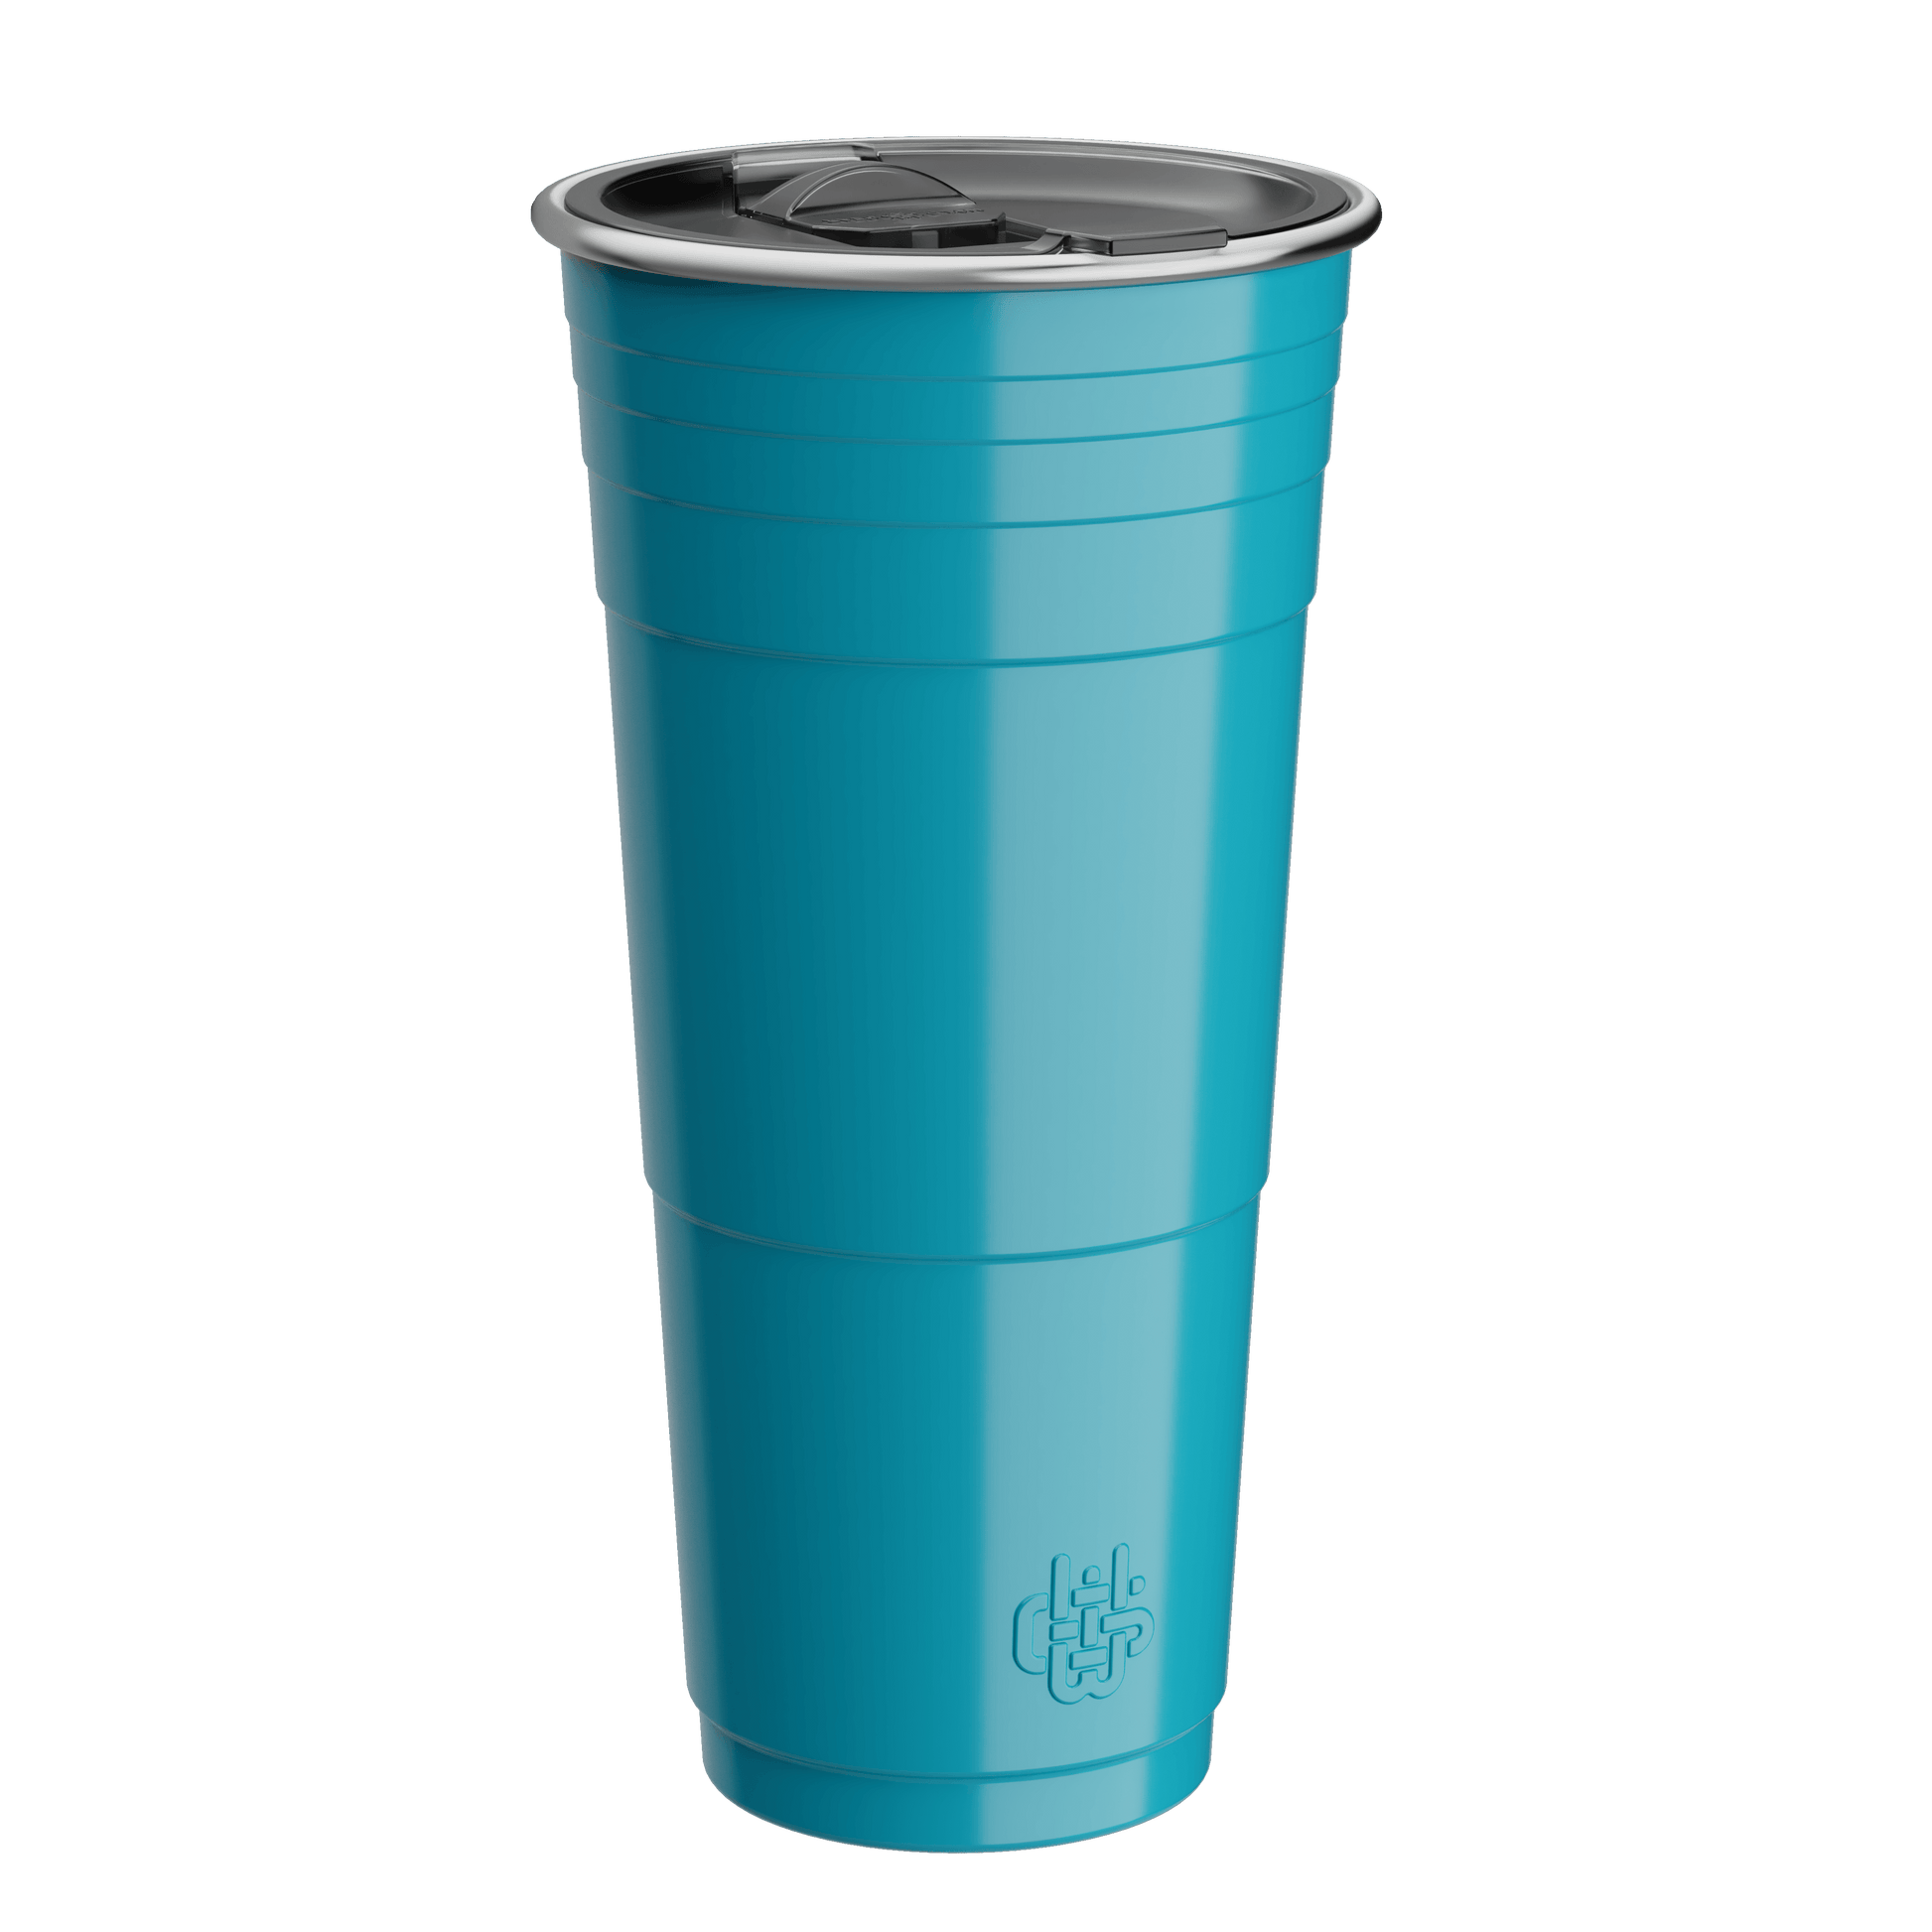 Wyld Gear 32oz Stainless Steel Cup - Multiple Colors - Perfect Etch